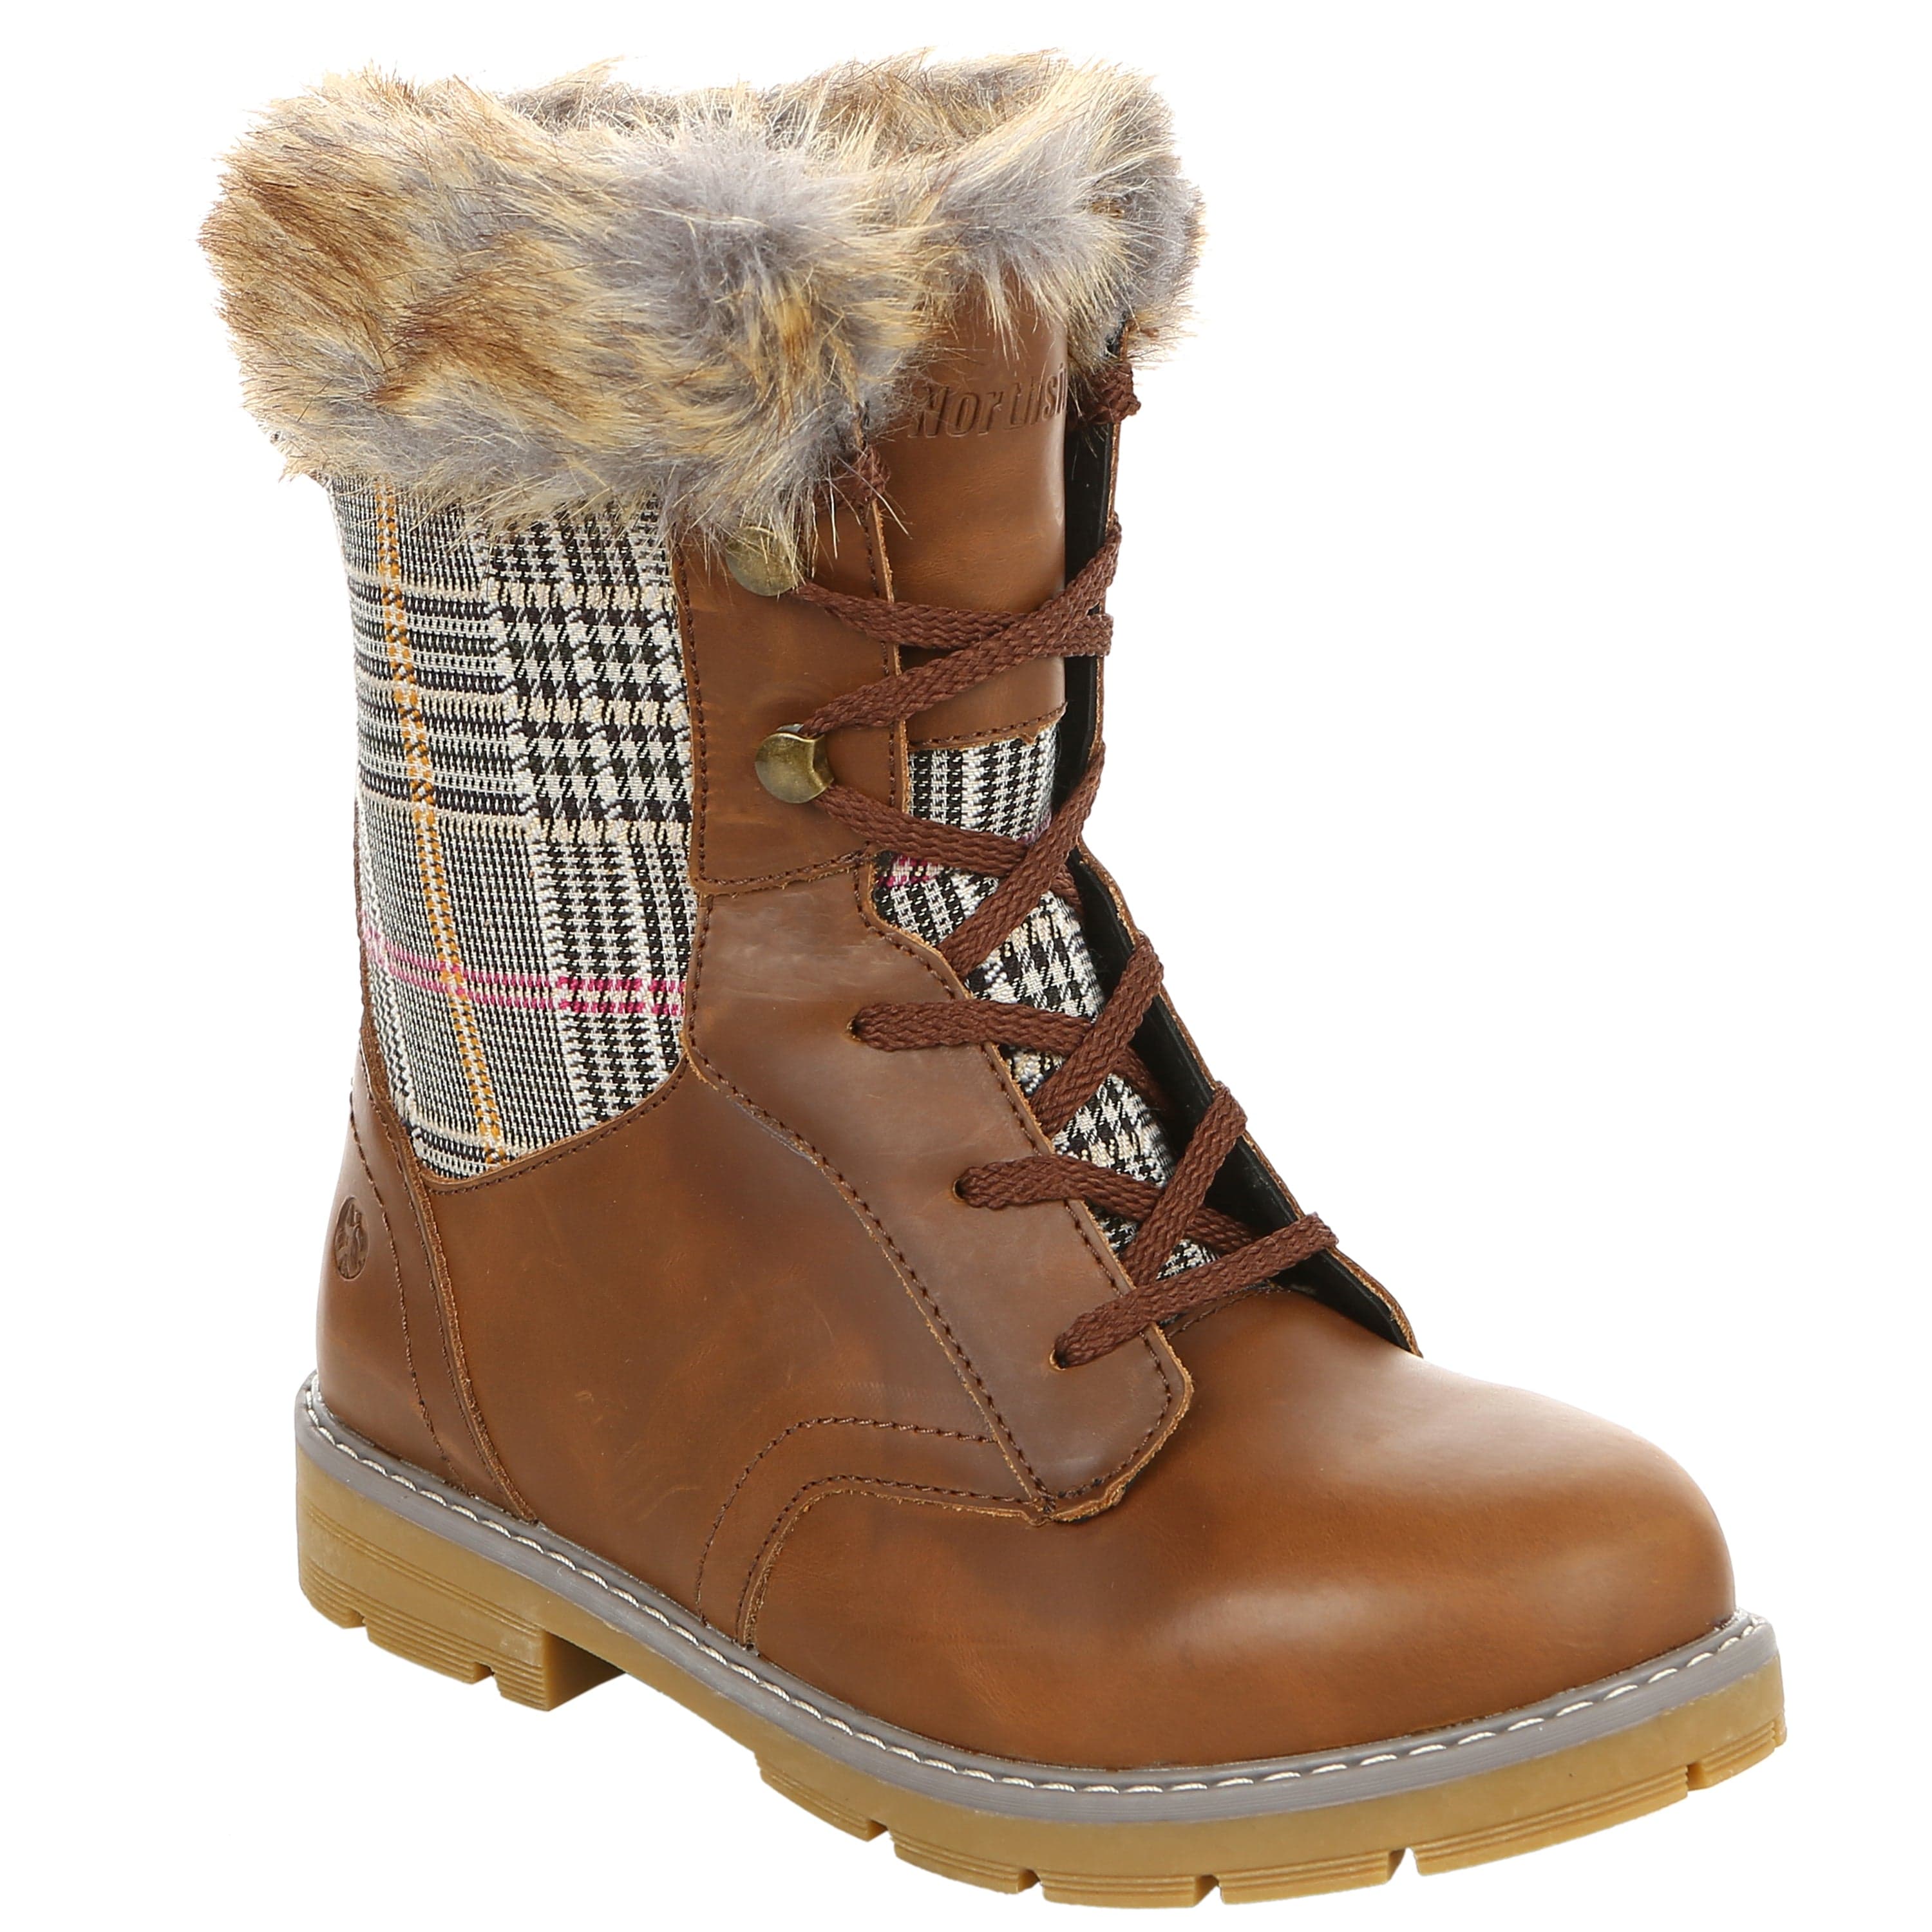 Women's Amber Cold Weather Fashion Boot - Northside USA